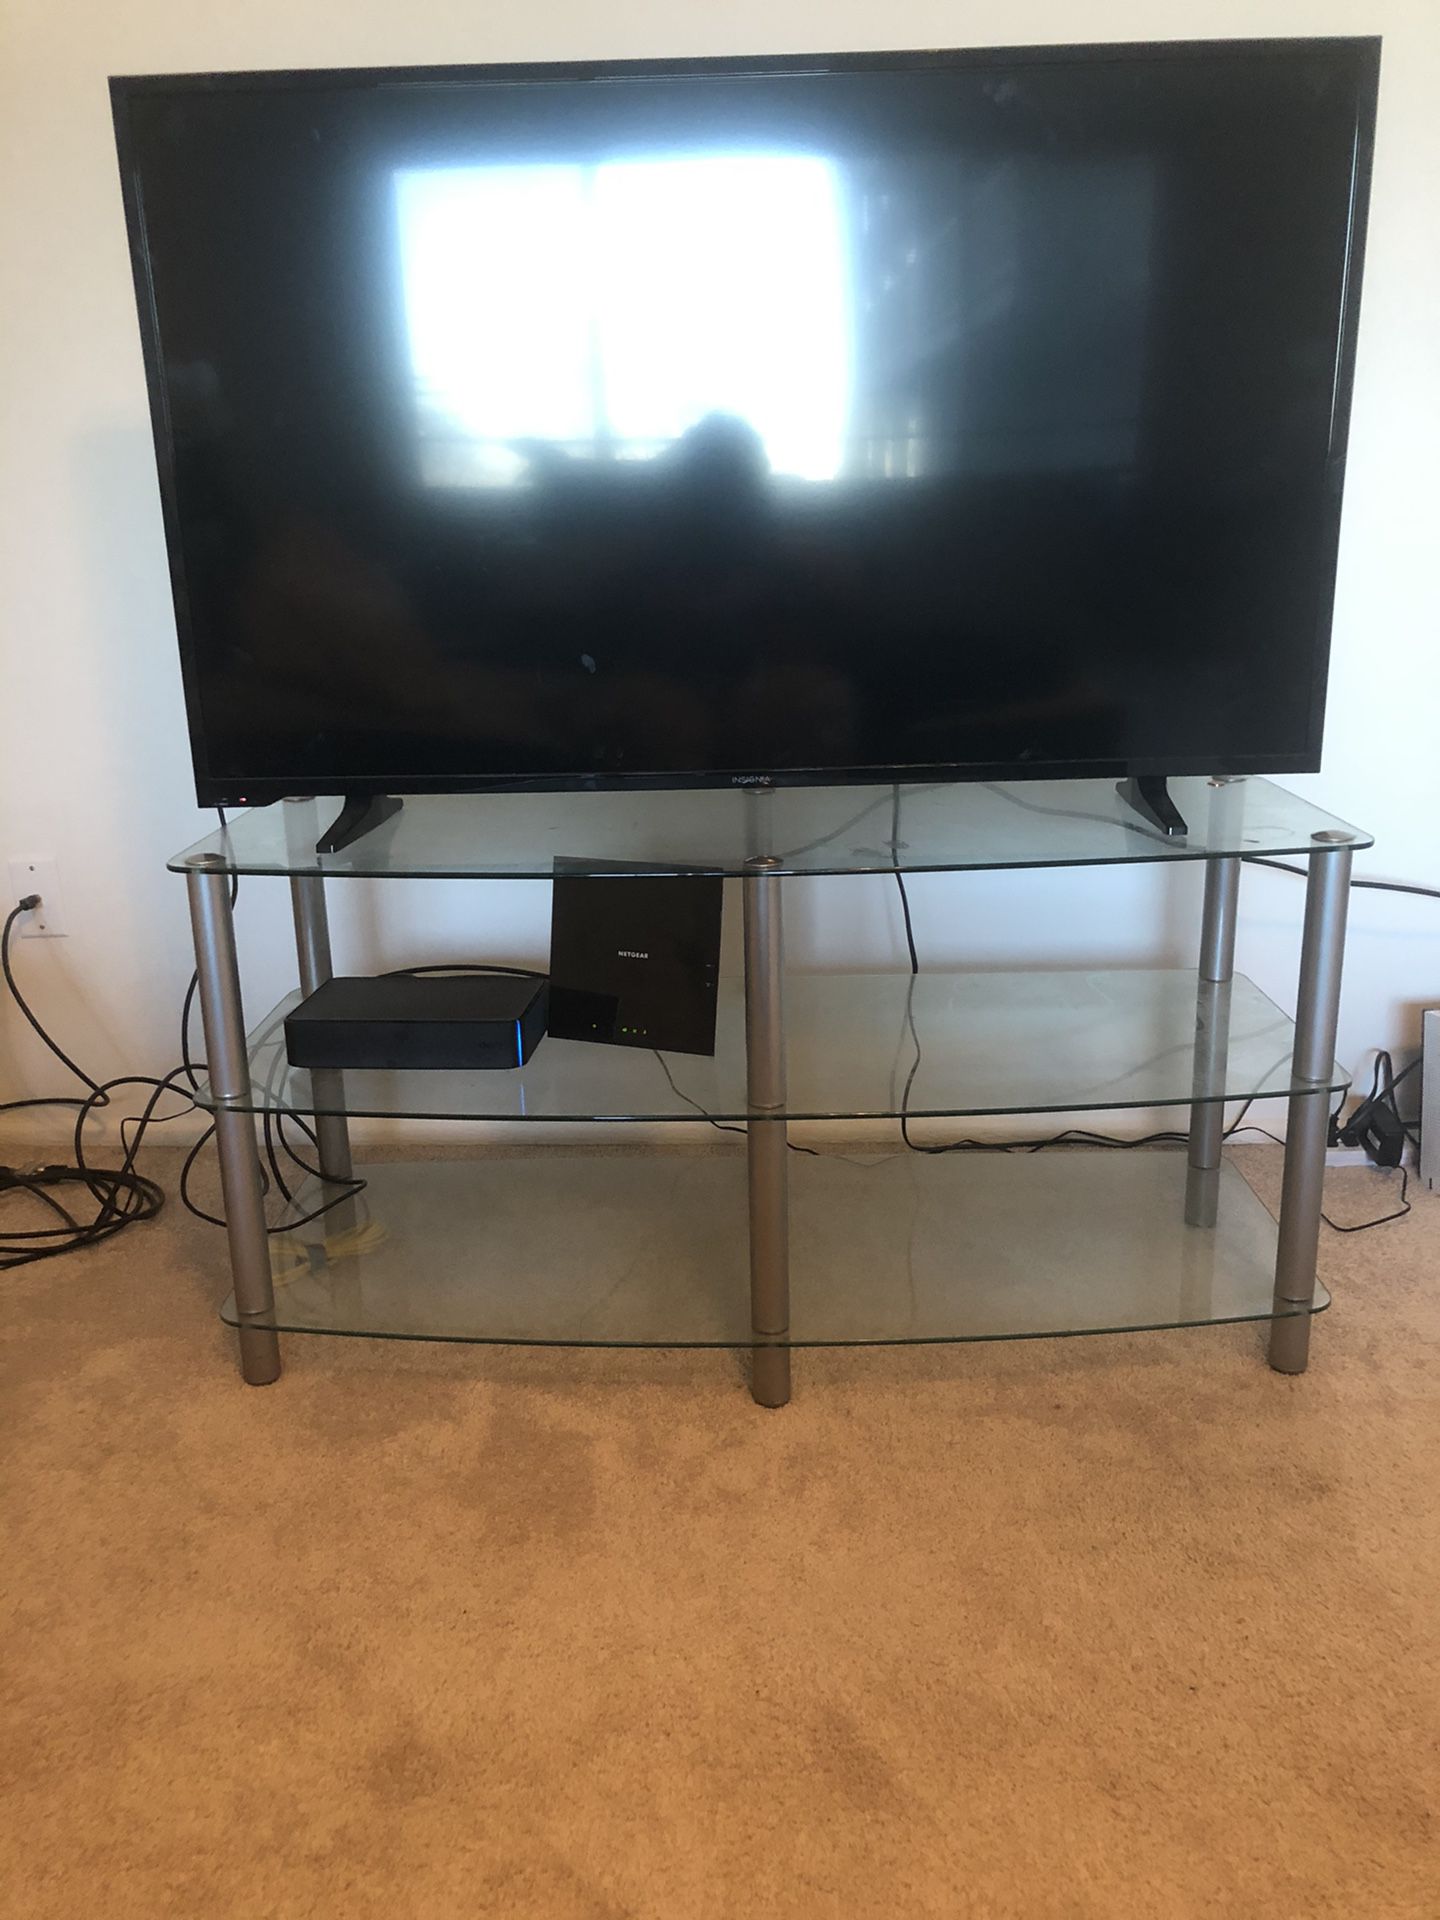 50” tv and tv stand.